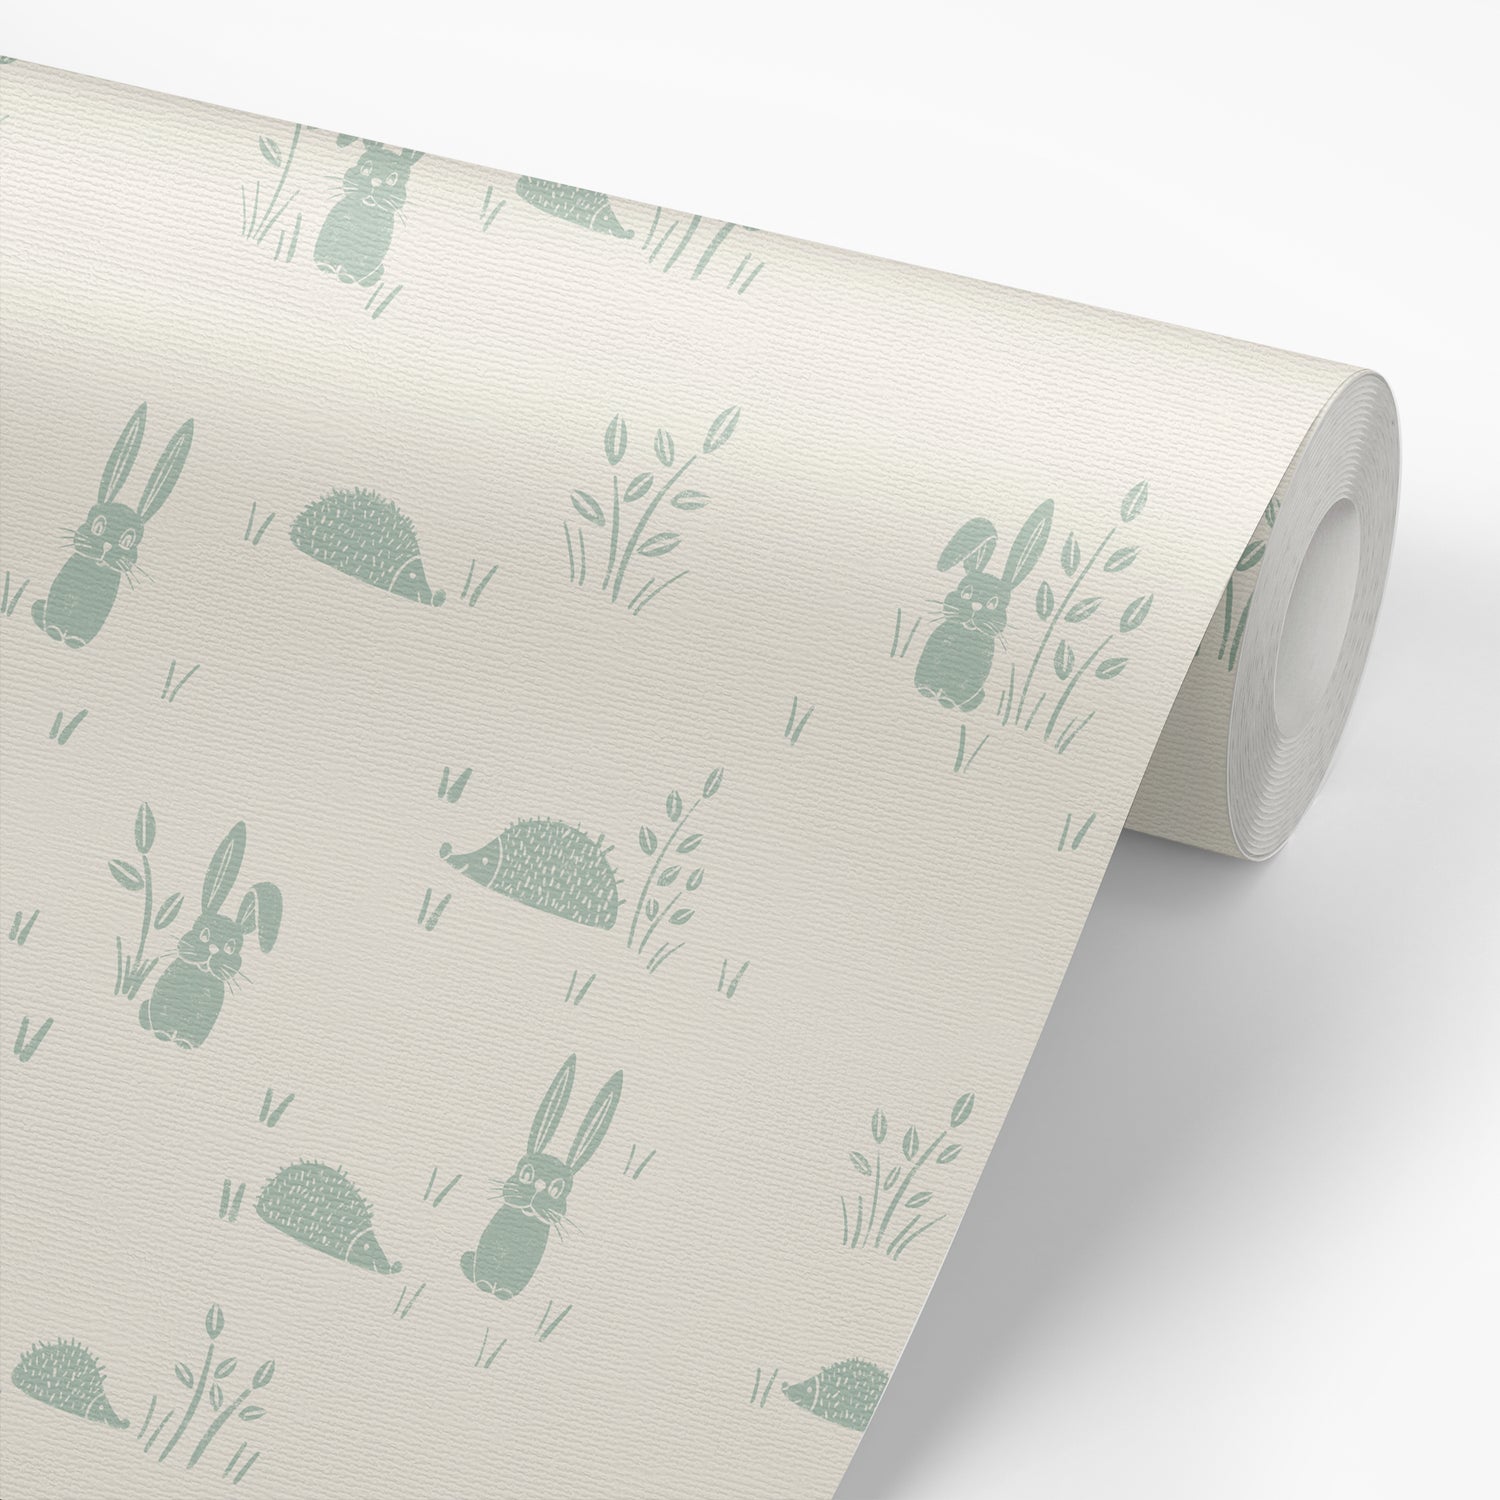 Hedgehogs and Rabbits Wallpaper in Sea Green shown on a roll of wallpaper.